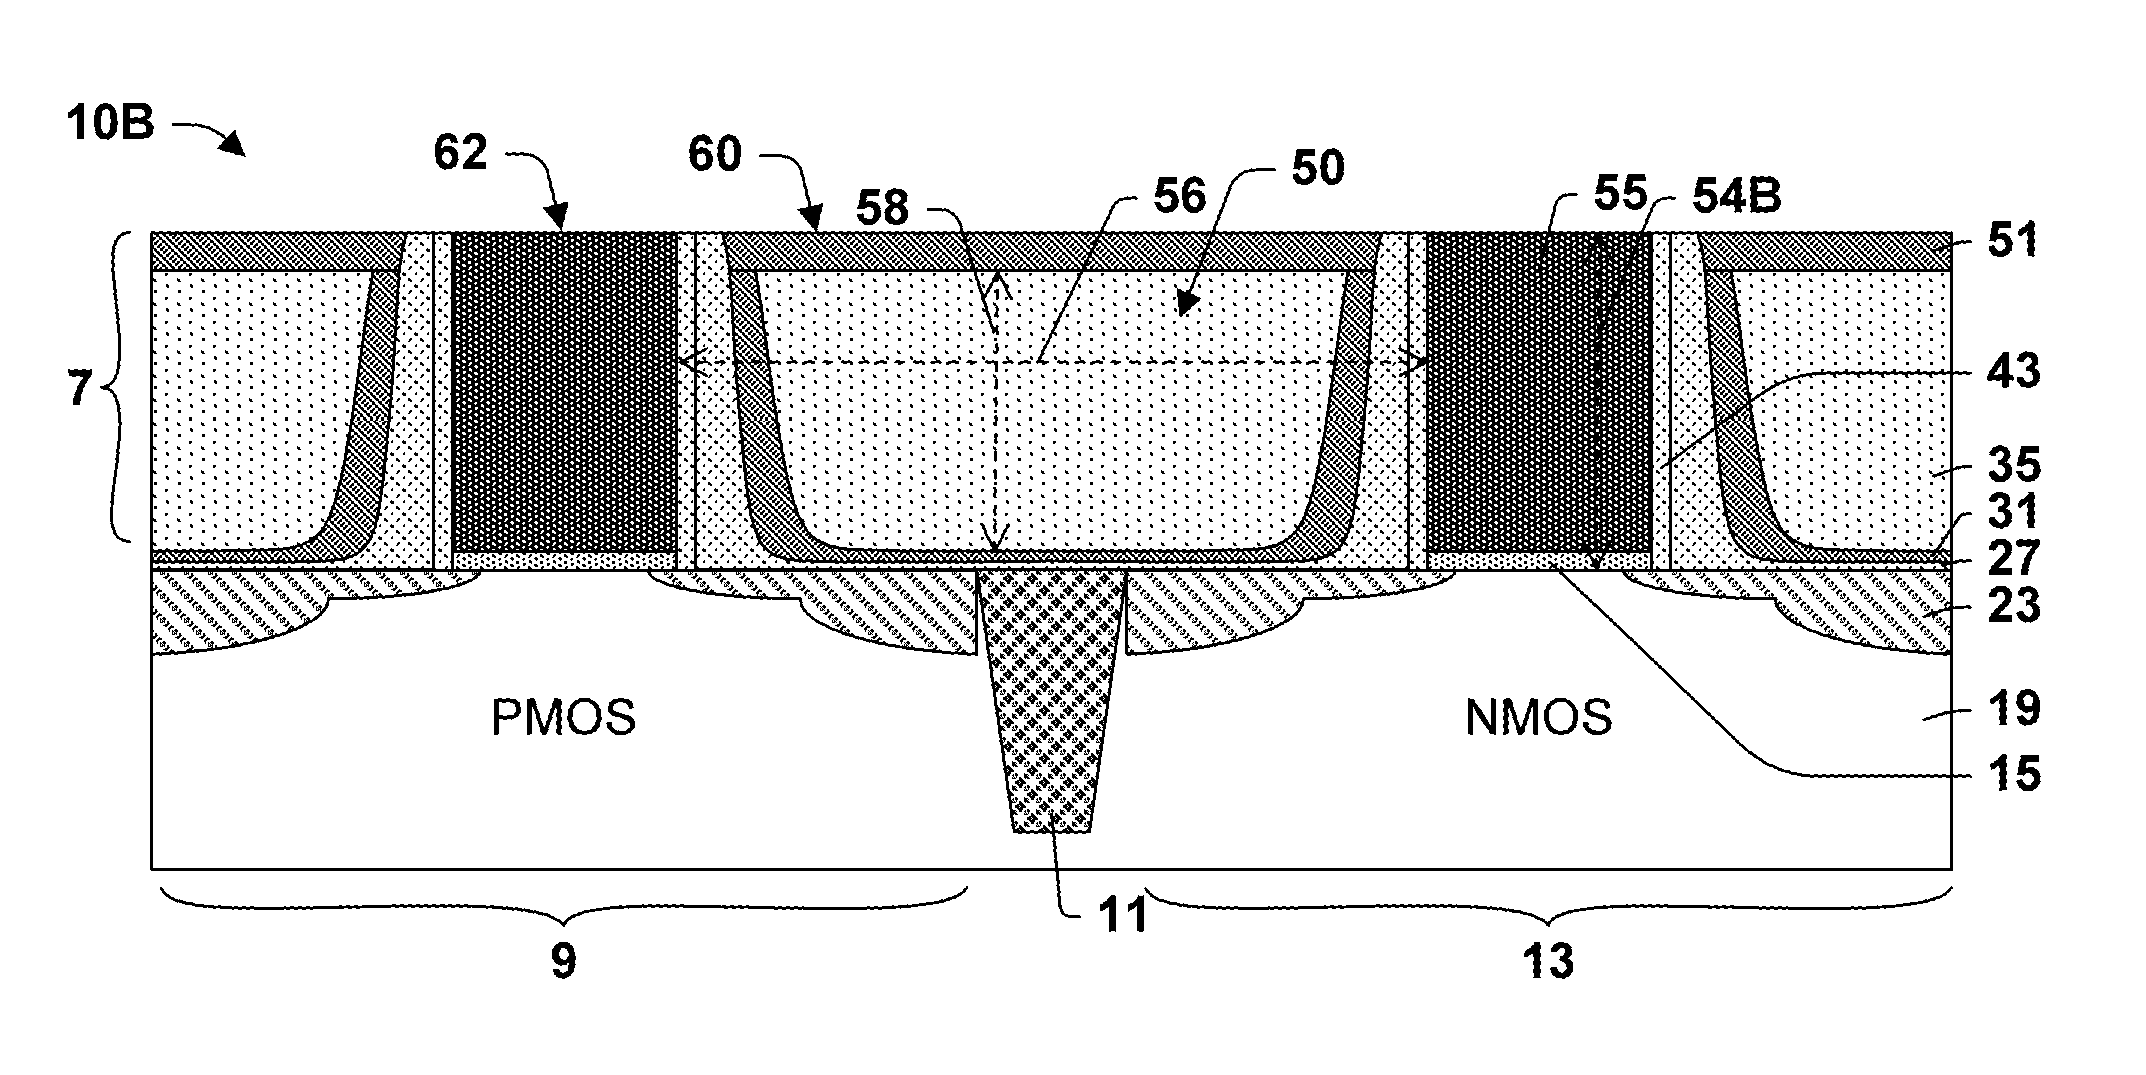 Composite Structure for Gate Level Inter-Layer Dielectric